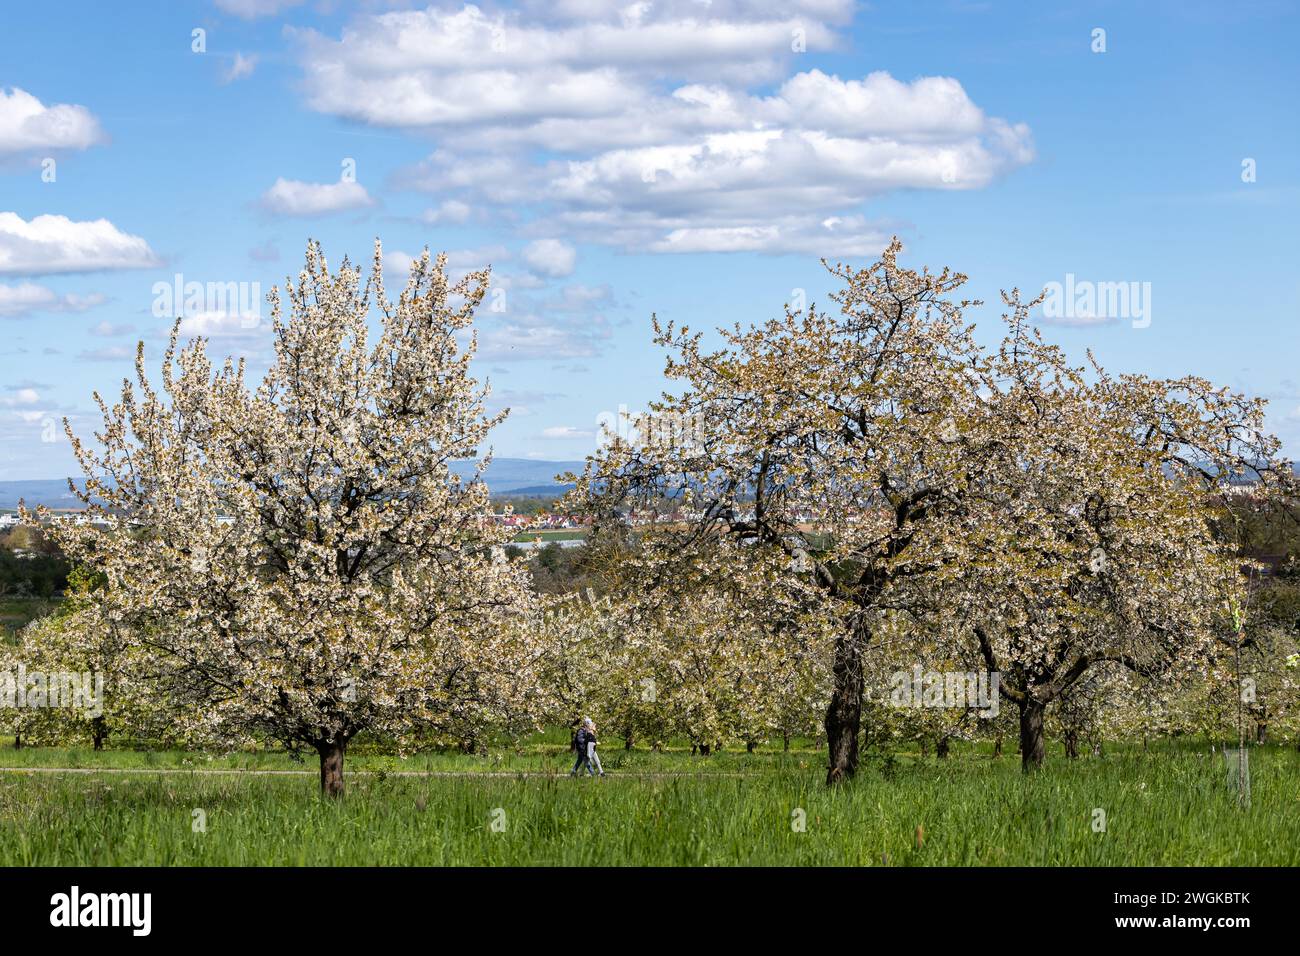 Blossoming cherry trees in the village Ockstadt, part of the town Friedberg, Hesse, Germany, Europe Stock Photo